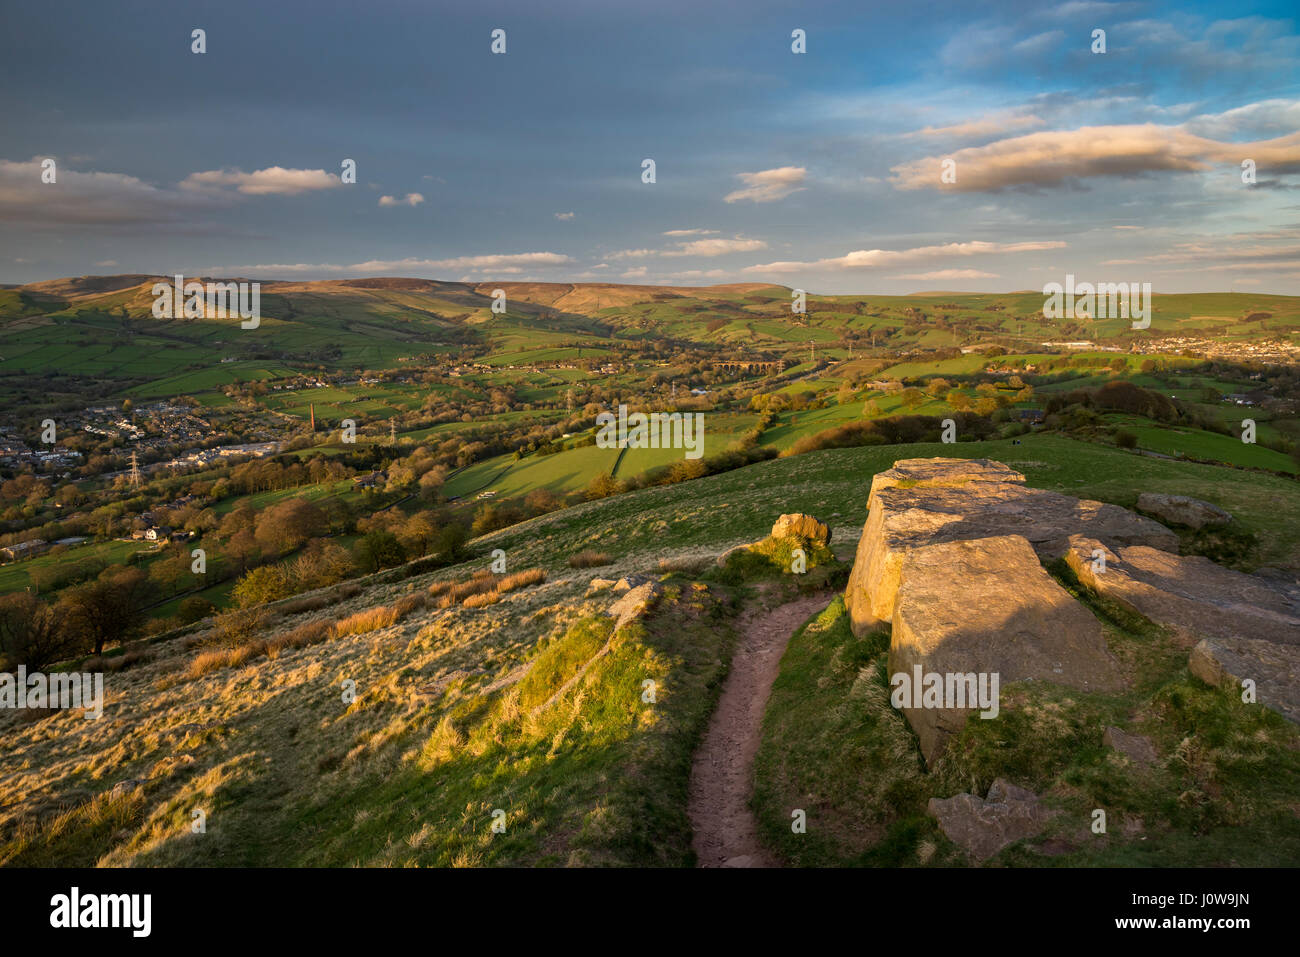 View from the rocky summit of Eccles Pike in the Peak District, Derbyshire, England. A lovely spring evening with view towards Chinley. Stock Photo